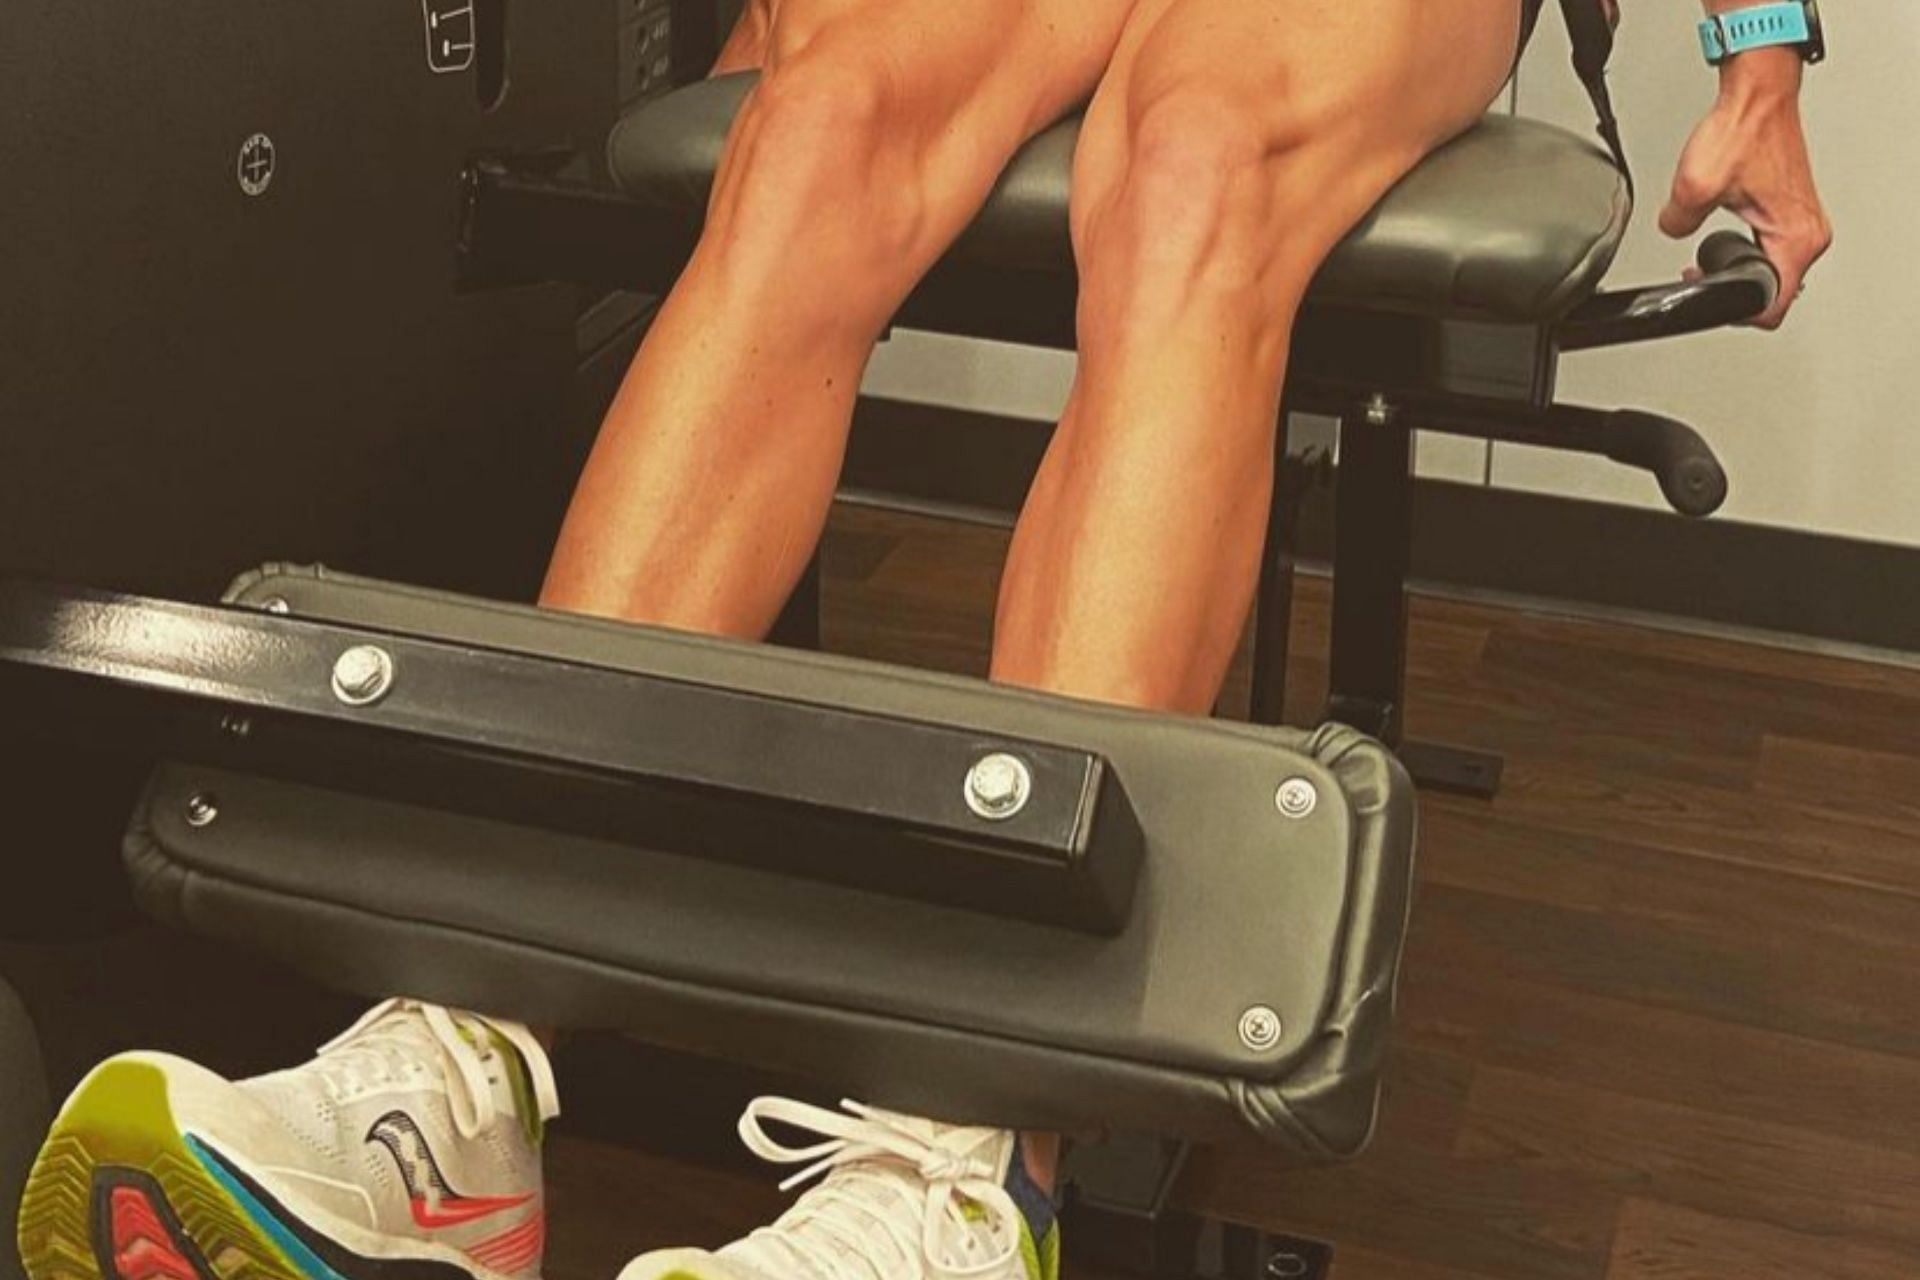 Seated leg extension is a quad-strengthening exercise. (Photo via Instagram/creativeadrenaline)